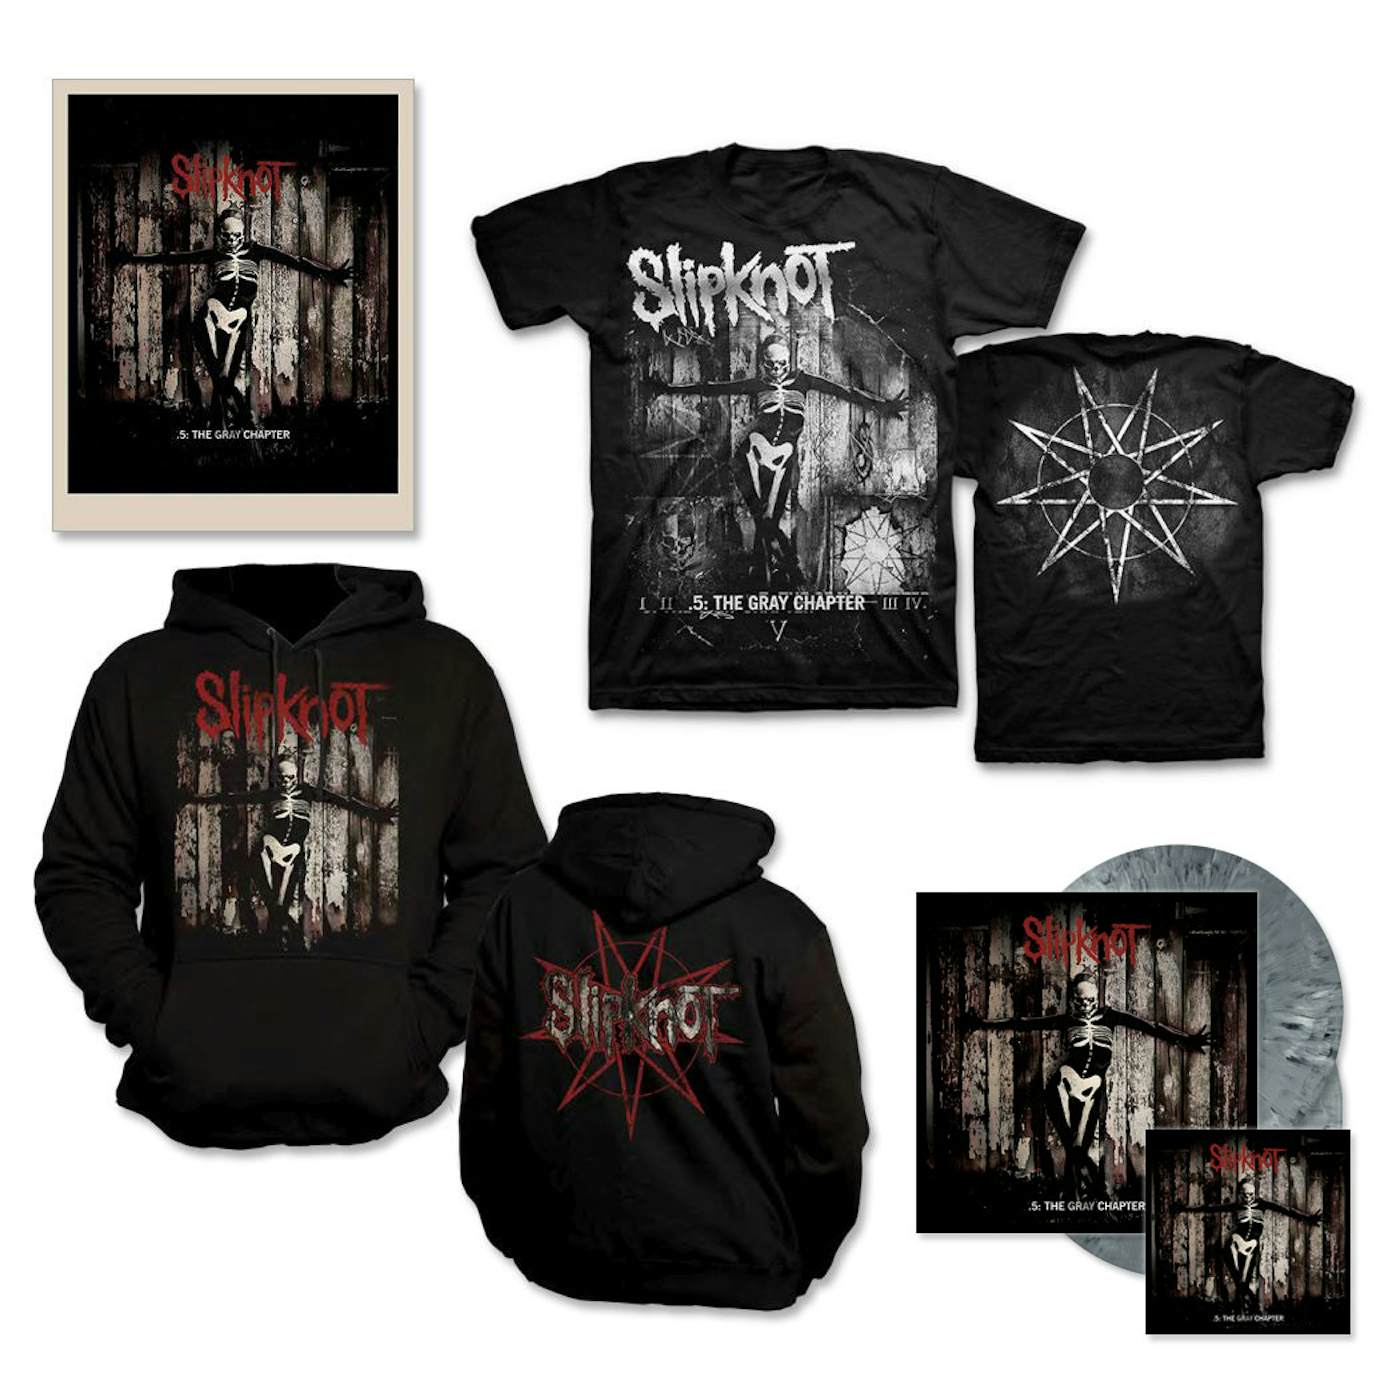 Slipknot .5: The Gray Chapter Everything Bundle